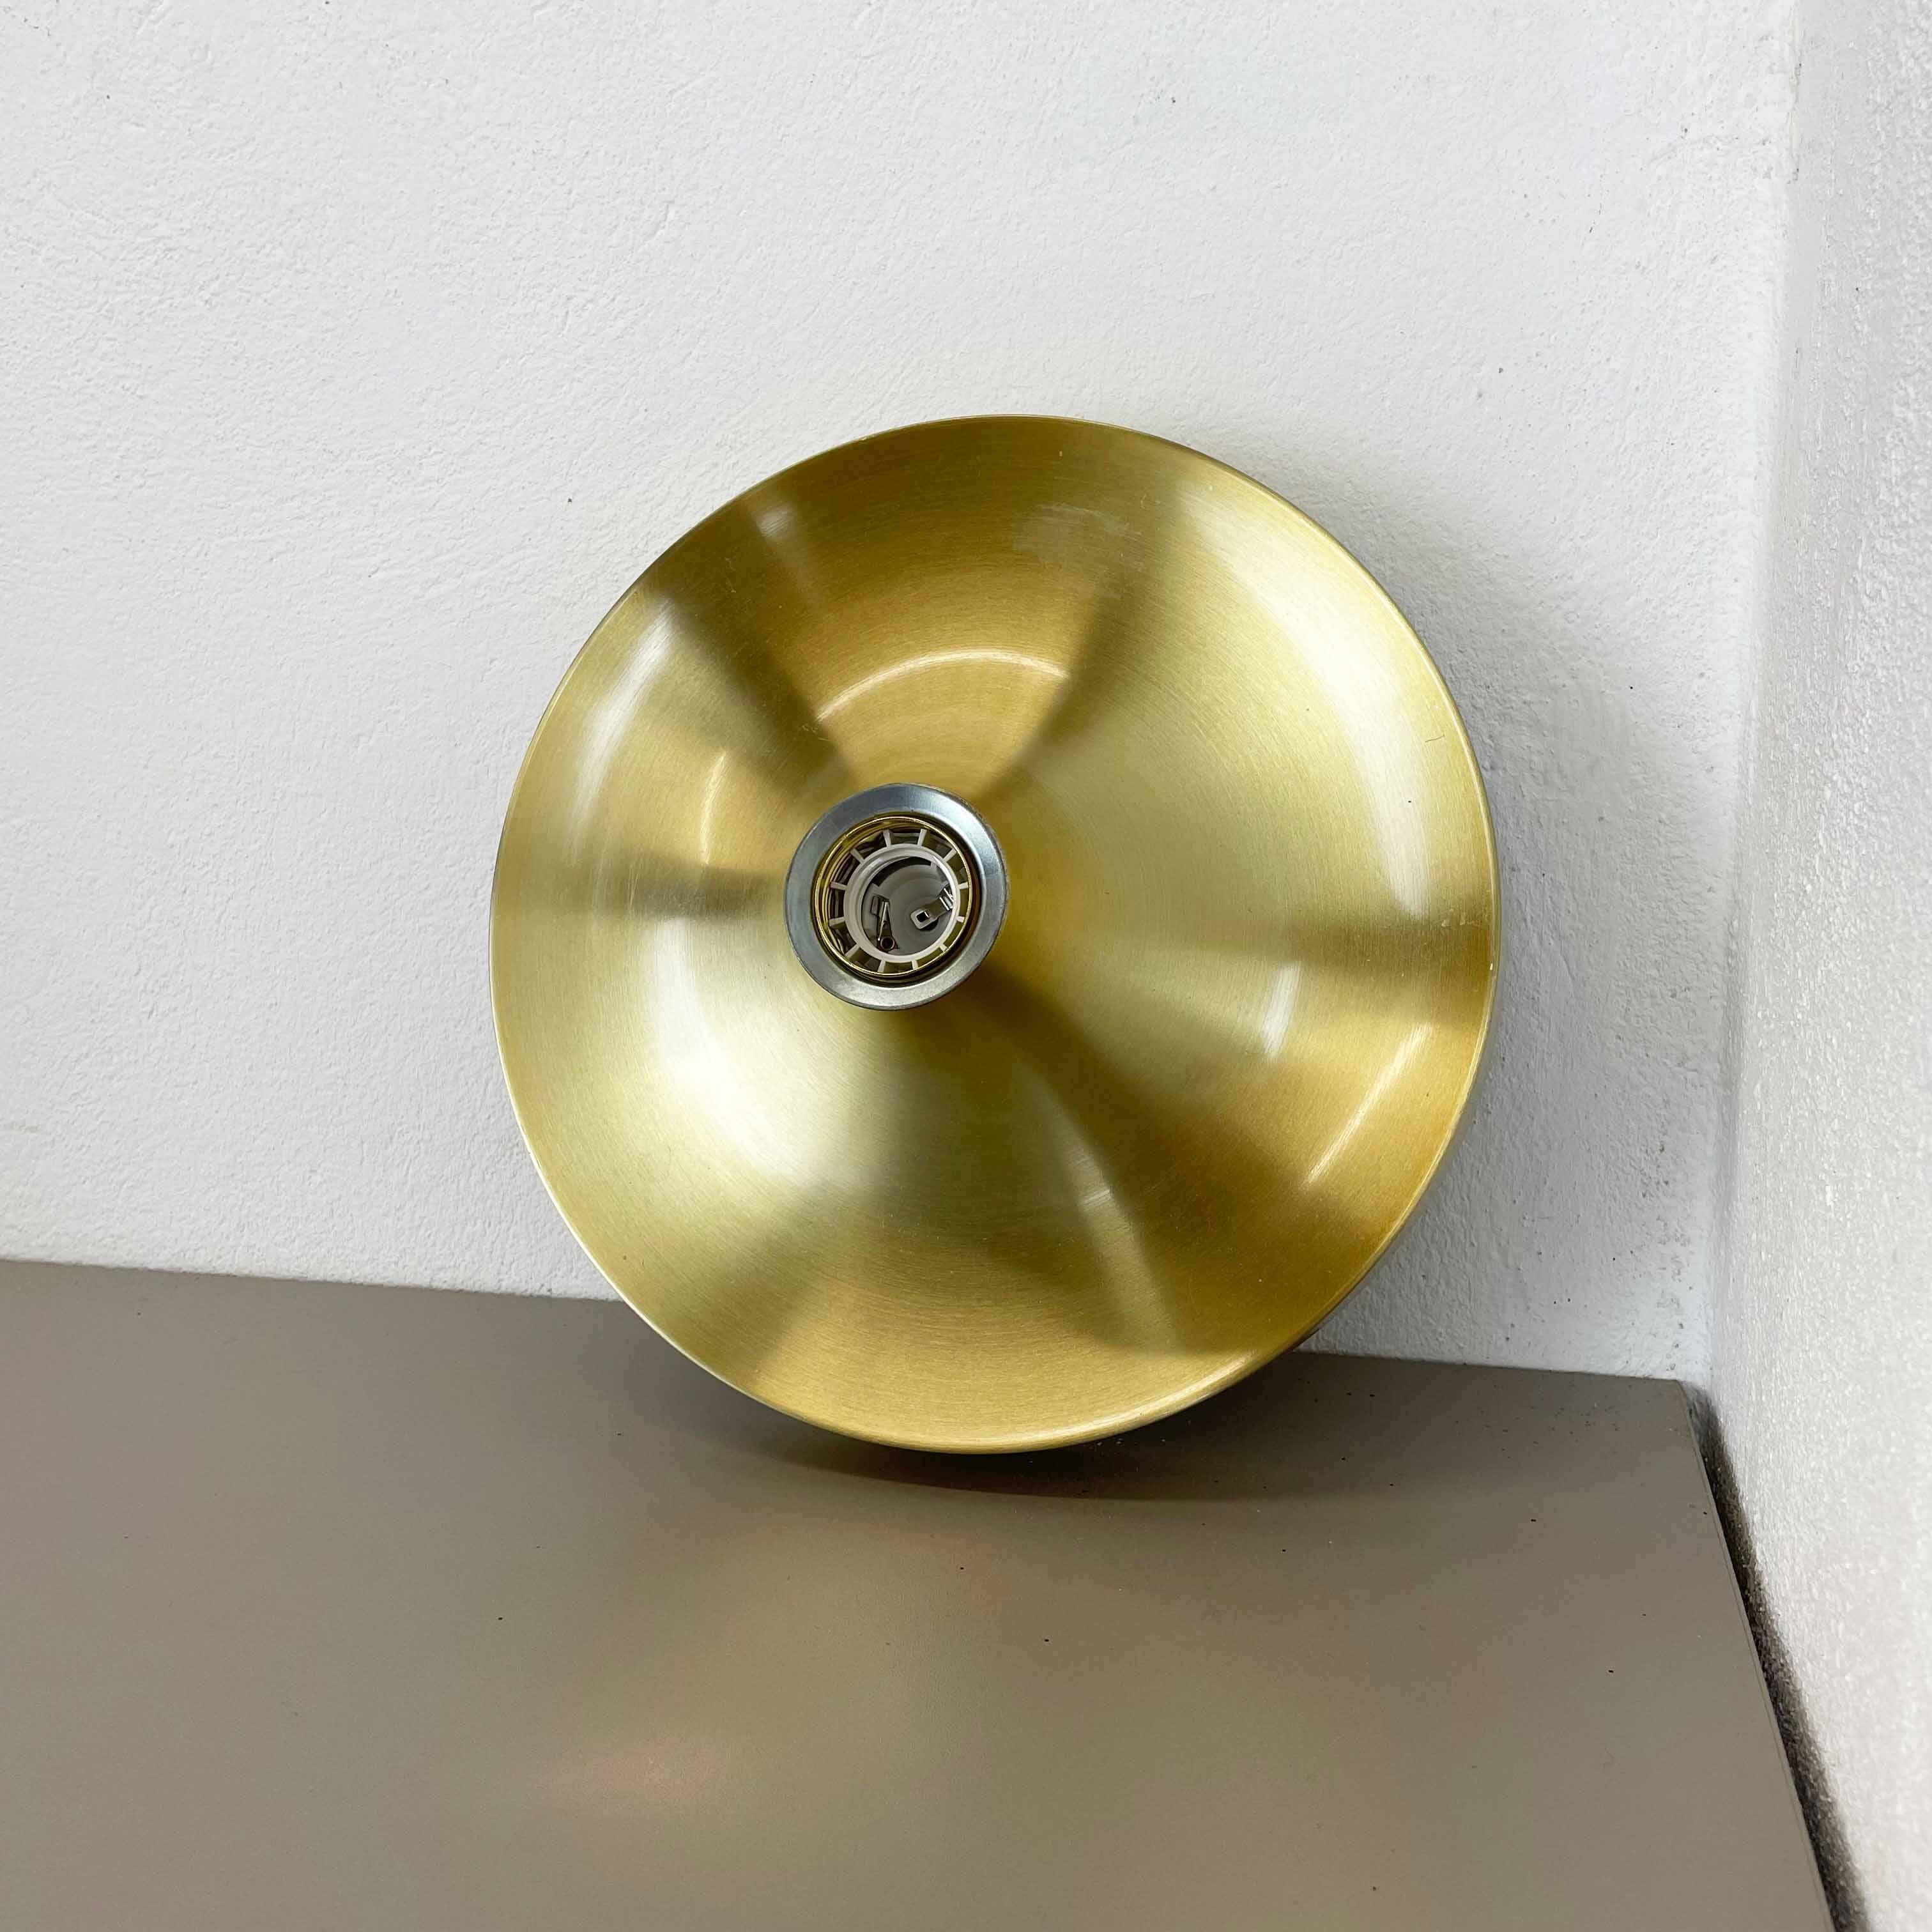 Rare Golden Charlotte Perriand Disc Wall Light by Honsel, Germany 1960s In Good Condition For Sale In Kirchlengern, DE